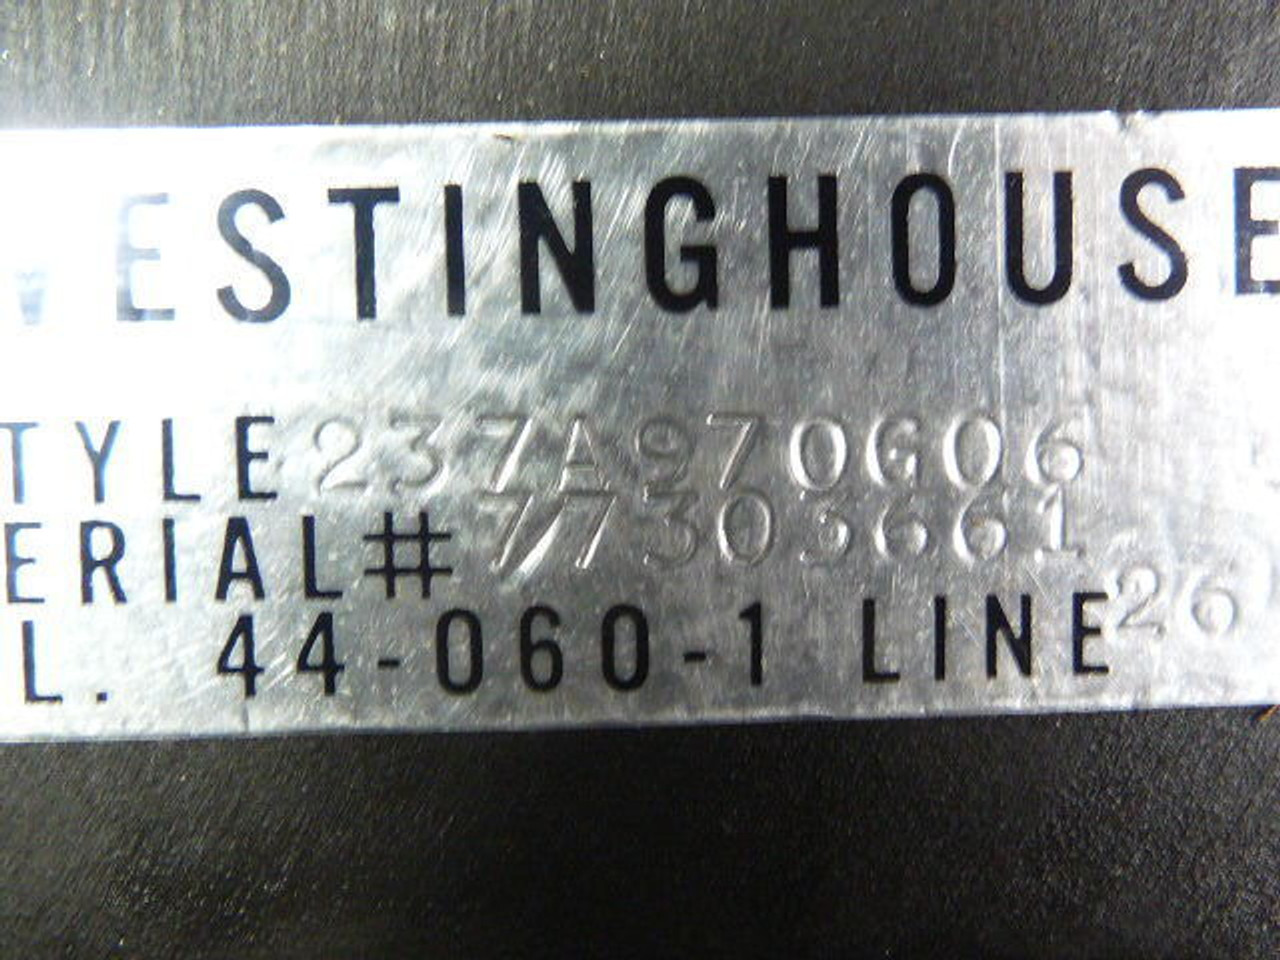 Westinghouse 237A970G06 Current Transformer Ratio 400:5A USED